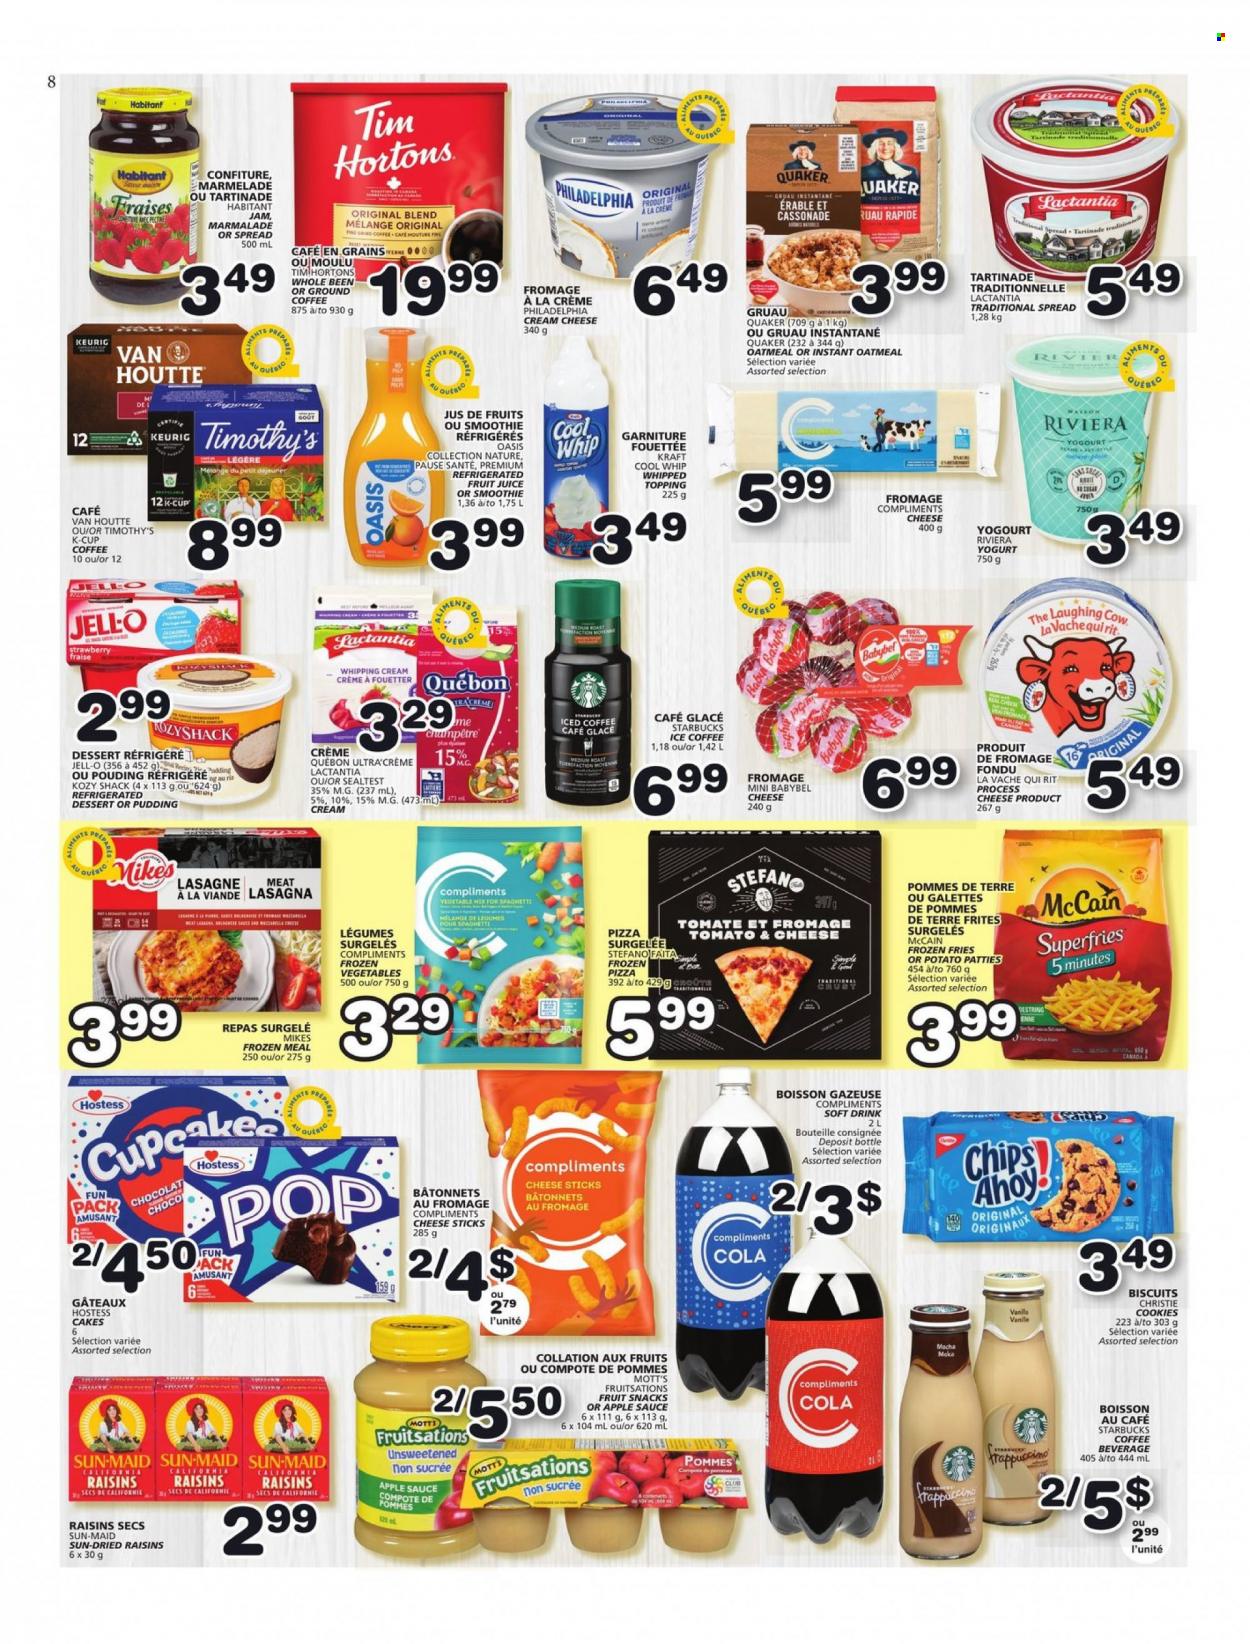 thumbnail - Les Marchés Tradition Flyer - May 19, 2022 - May 25, 2022 - Sales products - cake, cupcake, Mott's, spaghetti, pizza, sauce, Quaker, lasagna meal, Kraft®, cream cheese, The Laughing Cow, Babybel, pudding, yoghurt, Cool Whip, whipping cream, frozen vegetables, cheese sticks, McCain, potato fries, cookies, biscuit, fruit snack, oatmeal, topping, Jell-O, compote, apple sauce, fruit jam, dried fruit, juice, fruit juice, soft drink, smoothie, iced coffee, ground coffee, coffee capsules, Starbucks, K-Cups, Keurig, raisins, Philadelphia. Page 8.